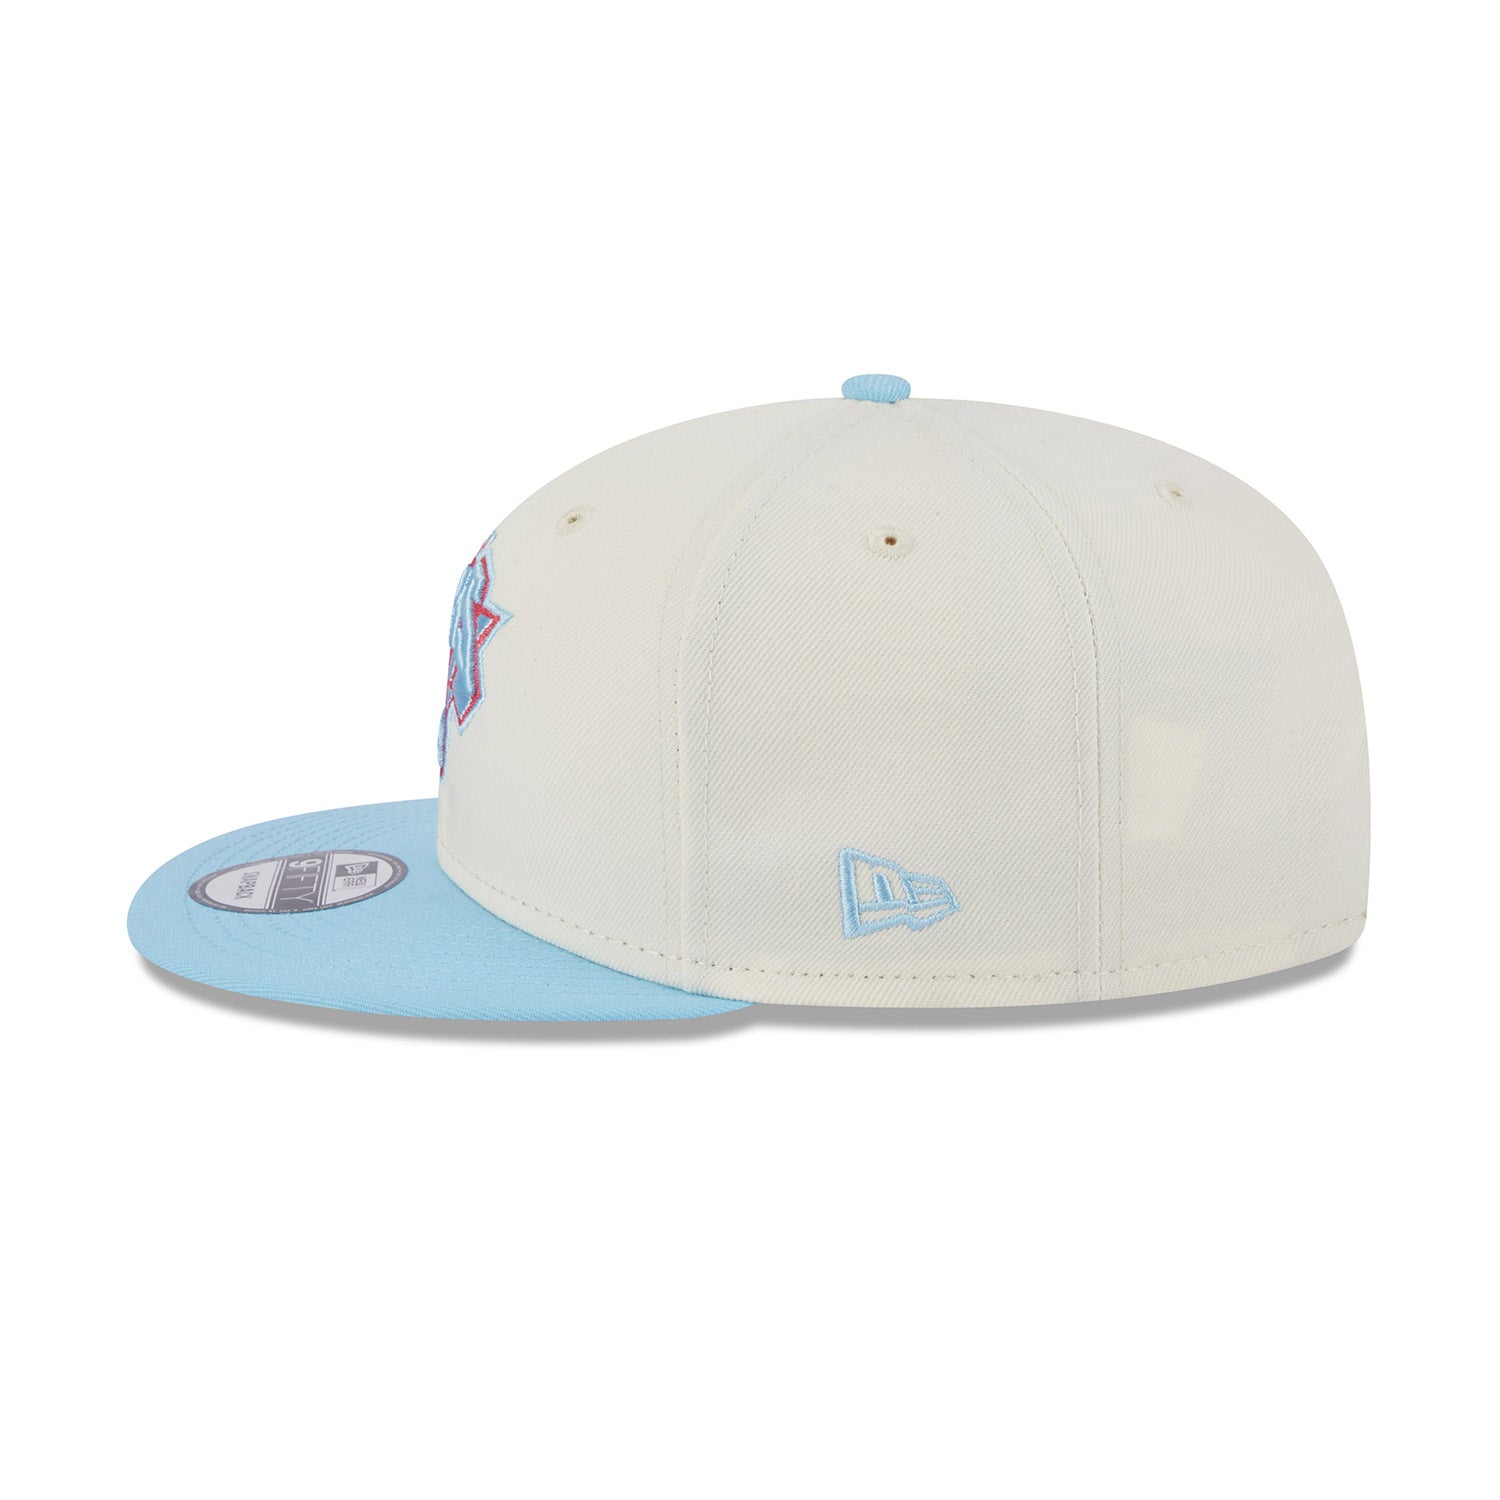 New Era Knicks Colorpack Two Tone Snapback Chrome/Light Blue Hat In White & Blue - Left Side View